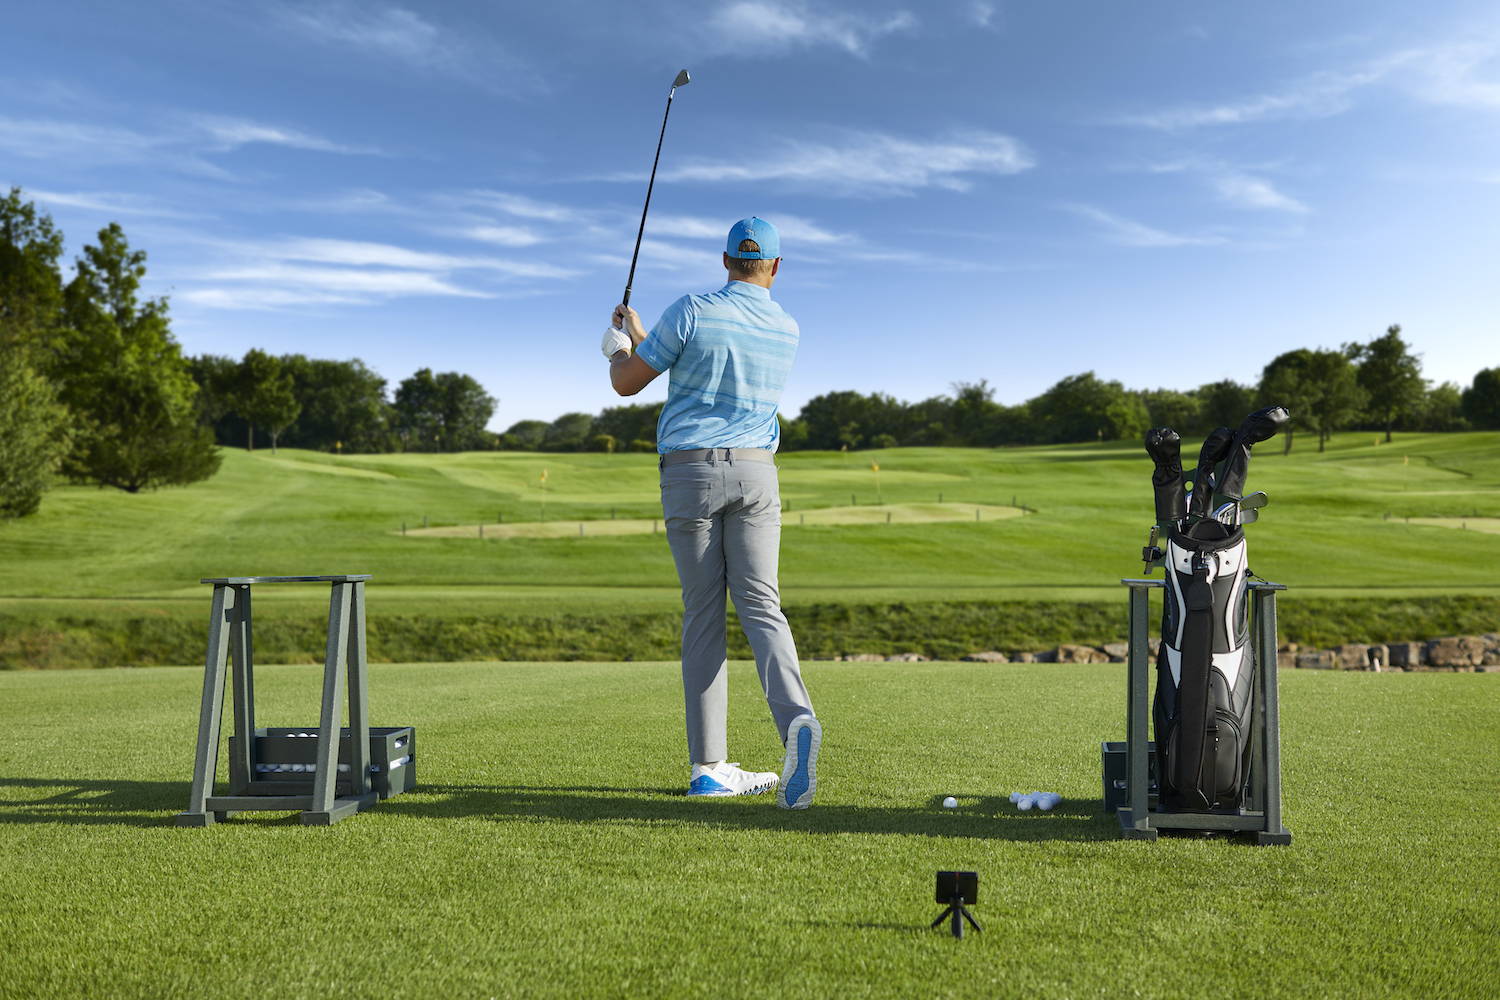 Golfer on the course with Garmin Approach R10 launch monitor and simulator